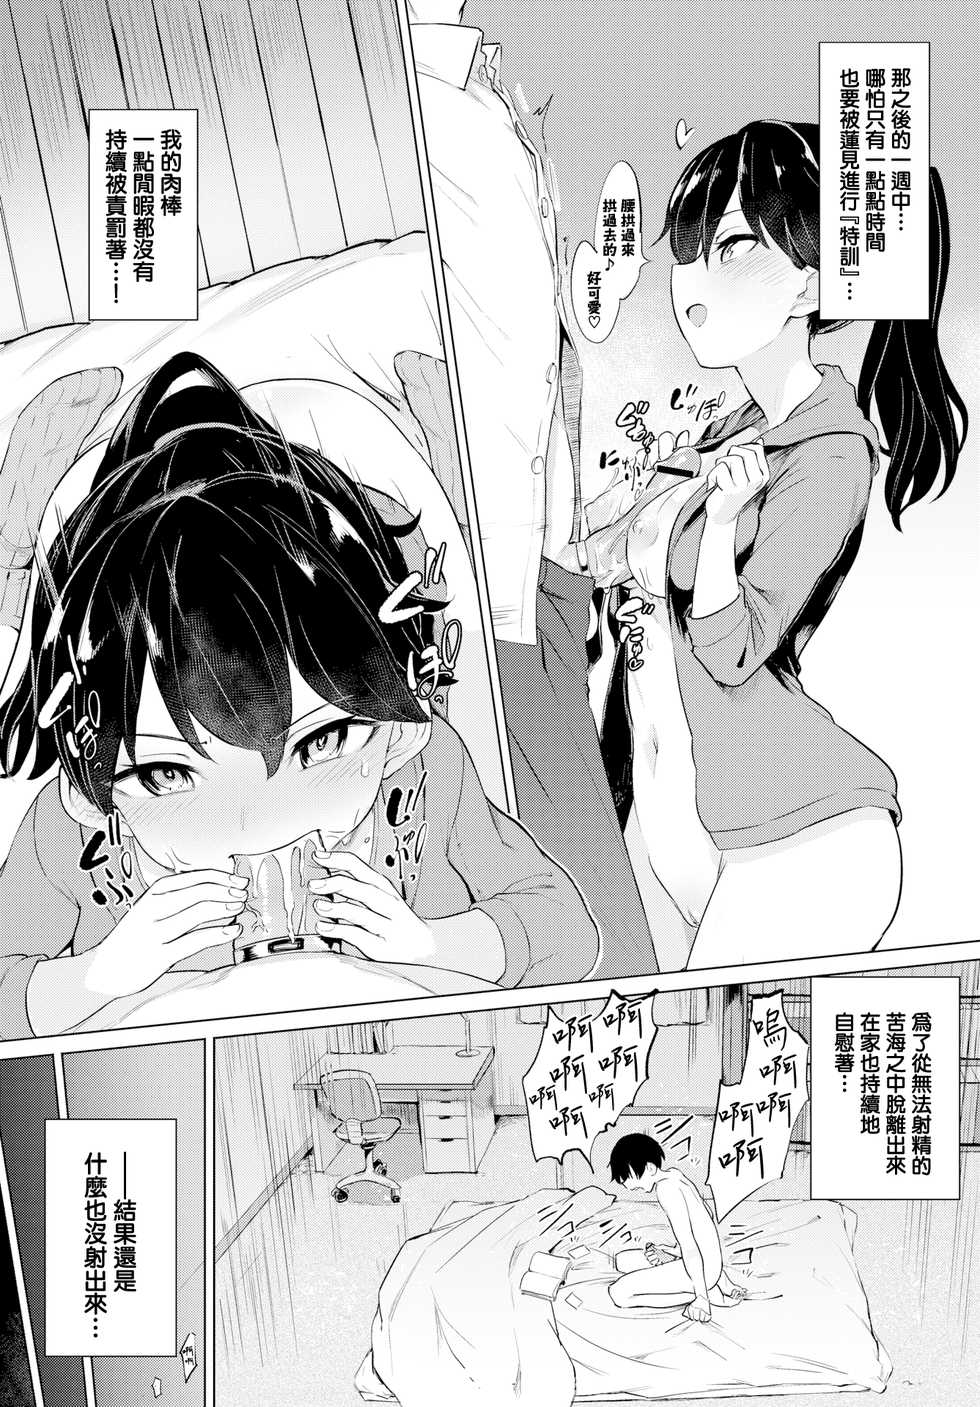 [Aomushi] Teisouring Challenge (COMIC BAVEL 2019-09) [Chinese] [無邪気漢化組] [Digital] - Page 5